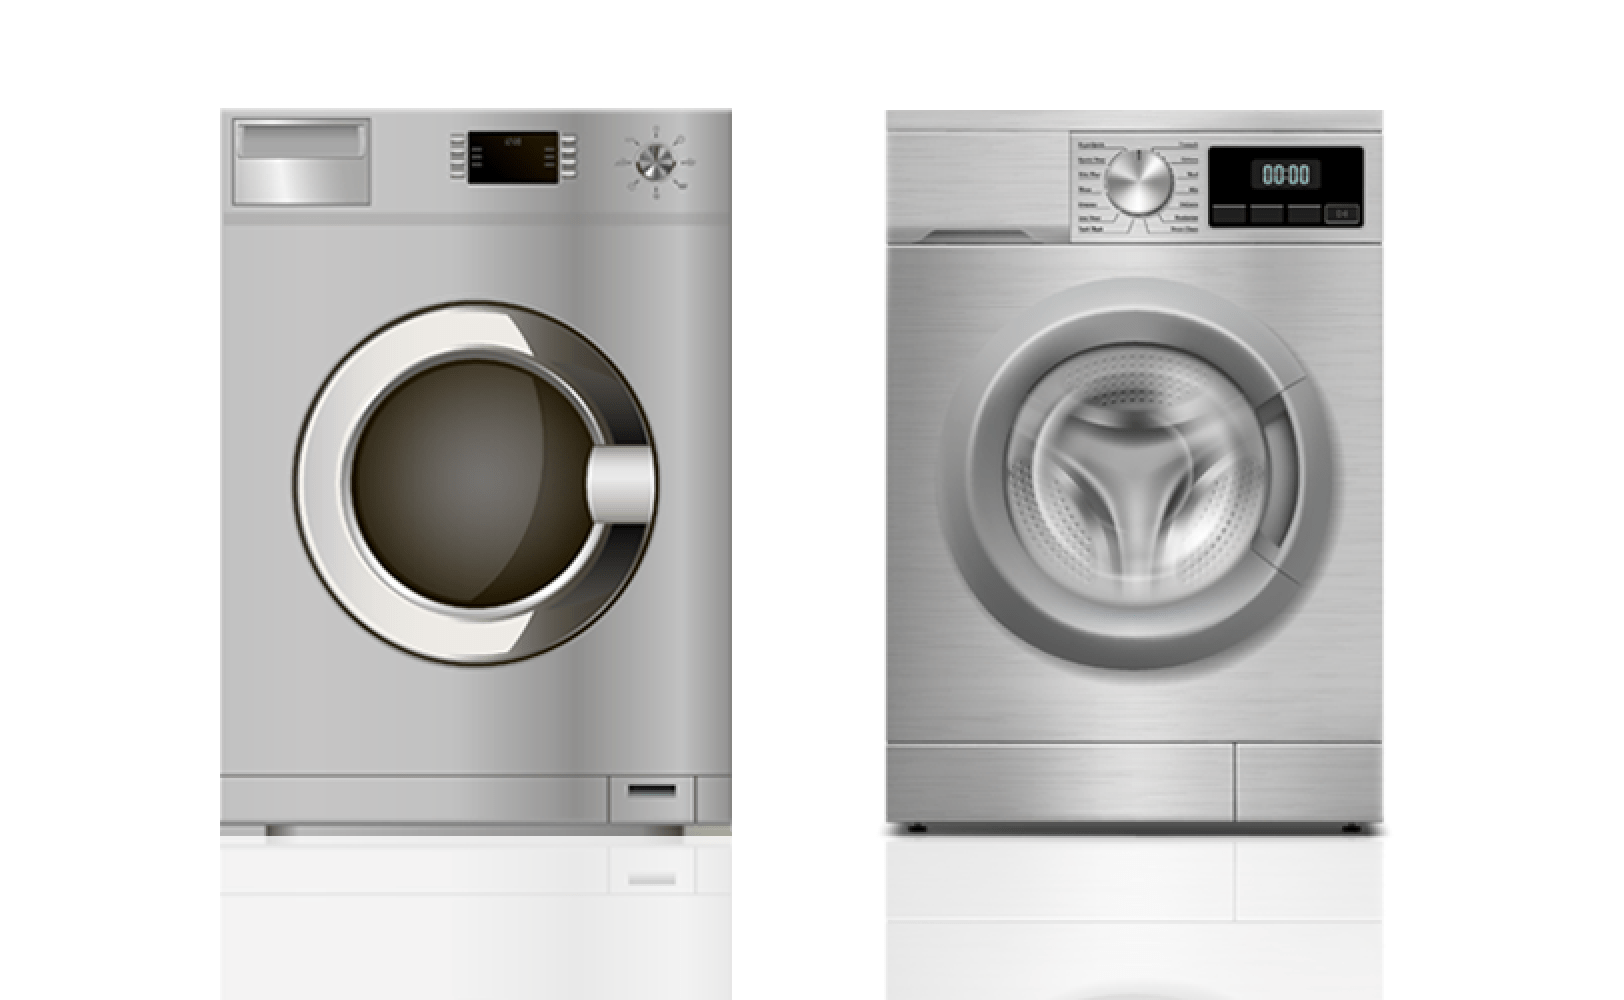 Washer Repair Service in Quogue